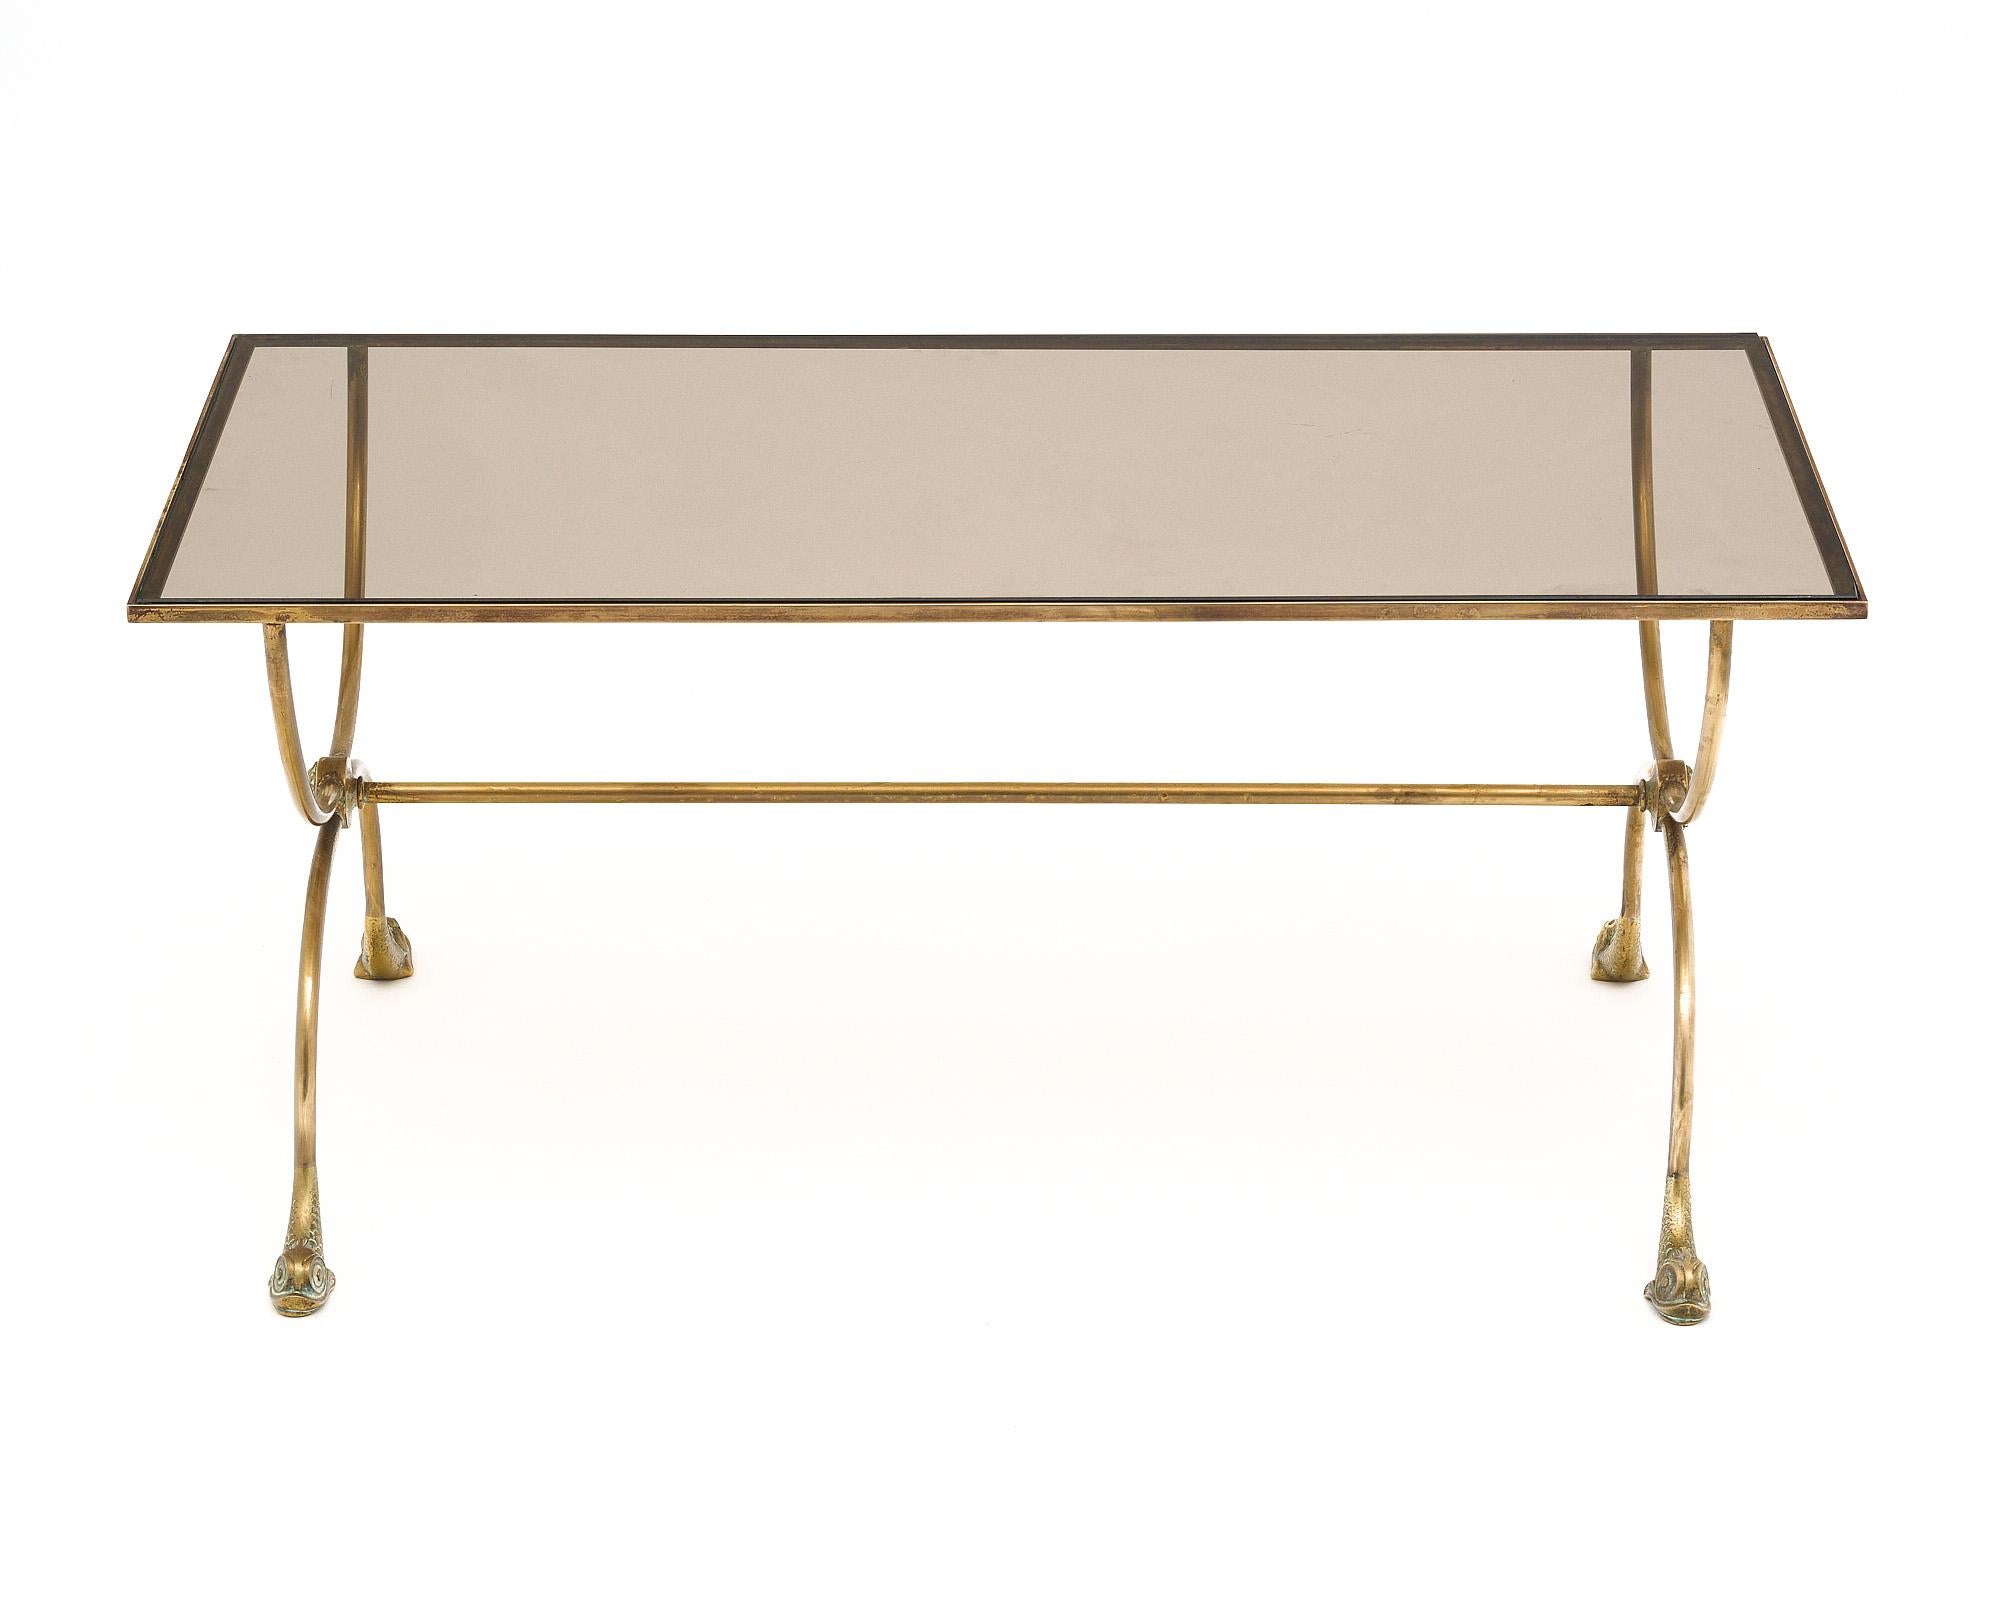 Neoclassical style coffee table made with a brass structure and smoked glass top. This piece by French design house Maison Jansen features curule legs with stretcher and dolphin head feet.
